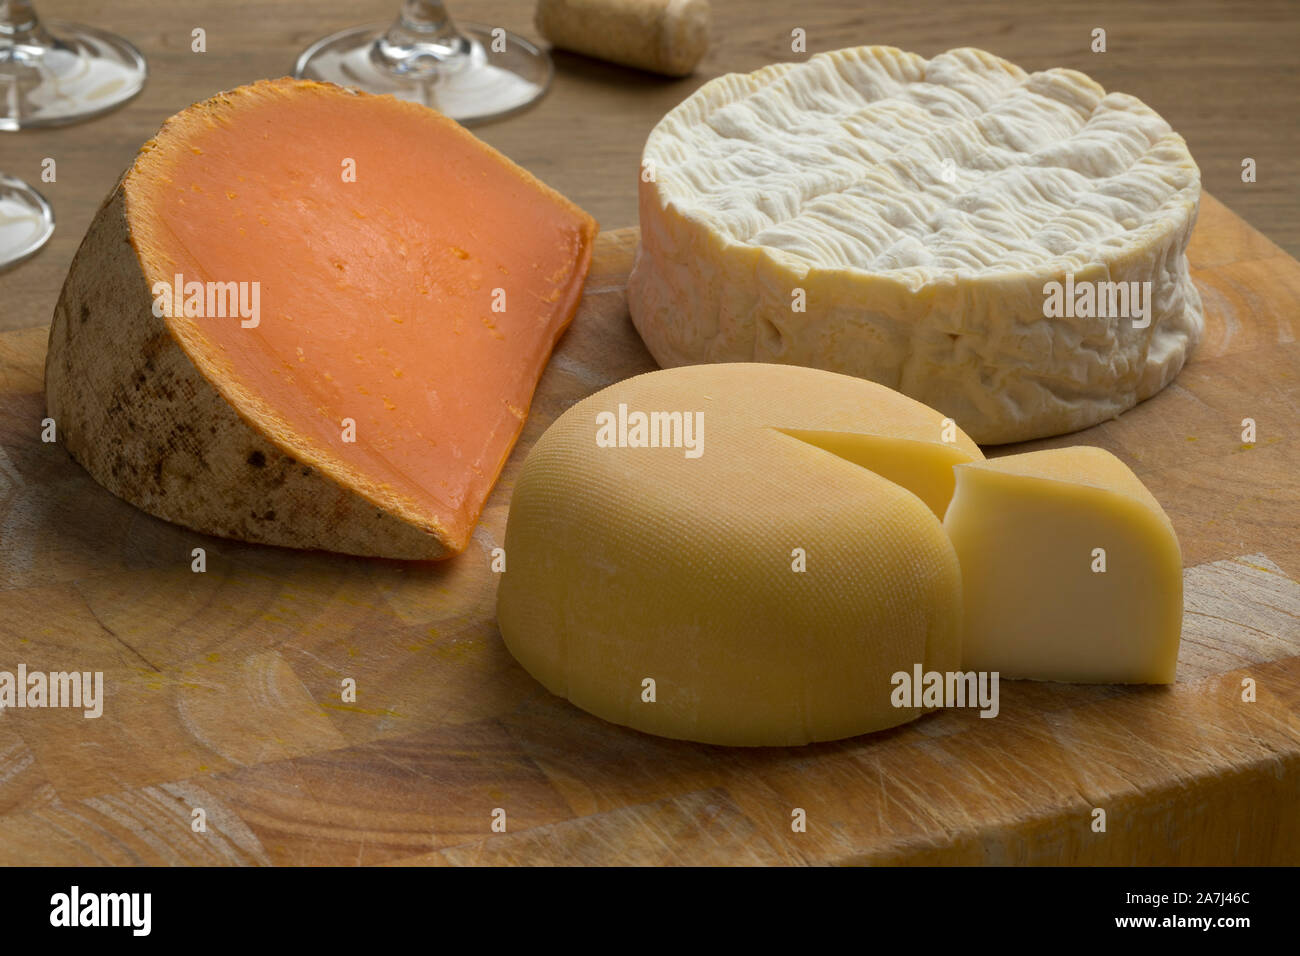 Diversity of traditional French cheese like Camembert, Mimolette and Le Mouillotin on a cutting board Stock Photo